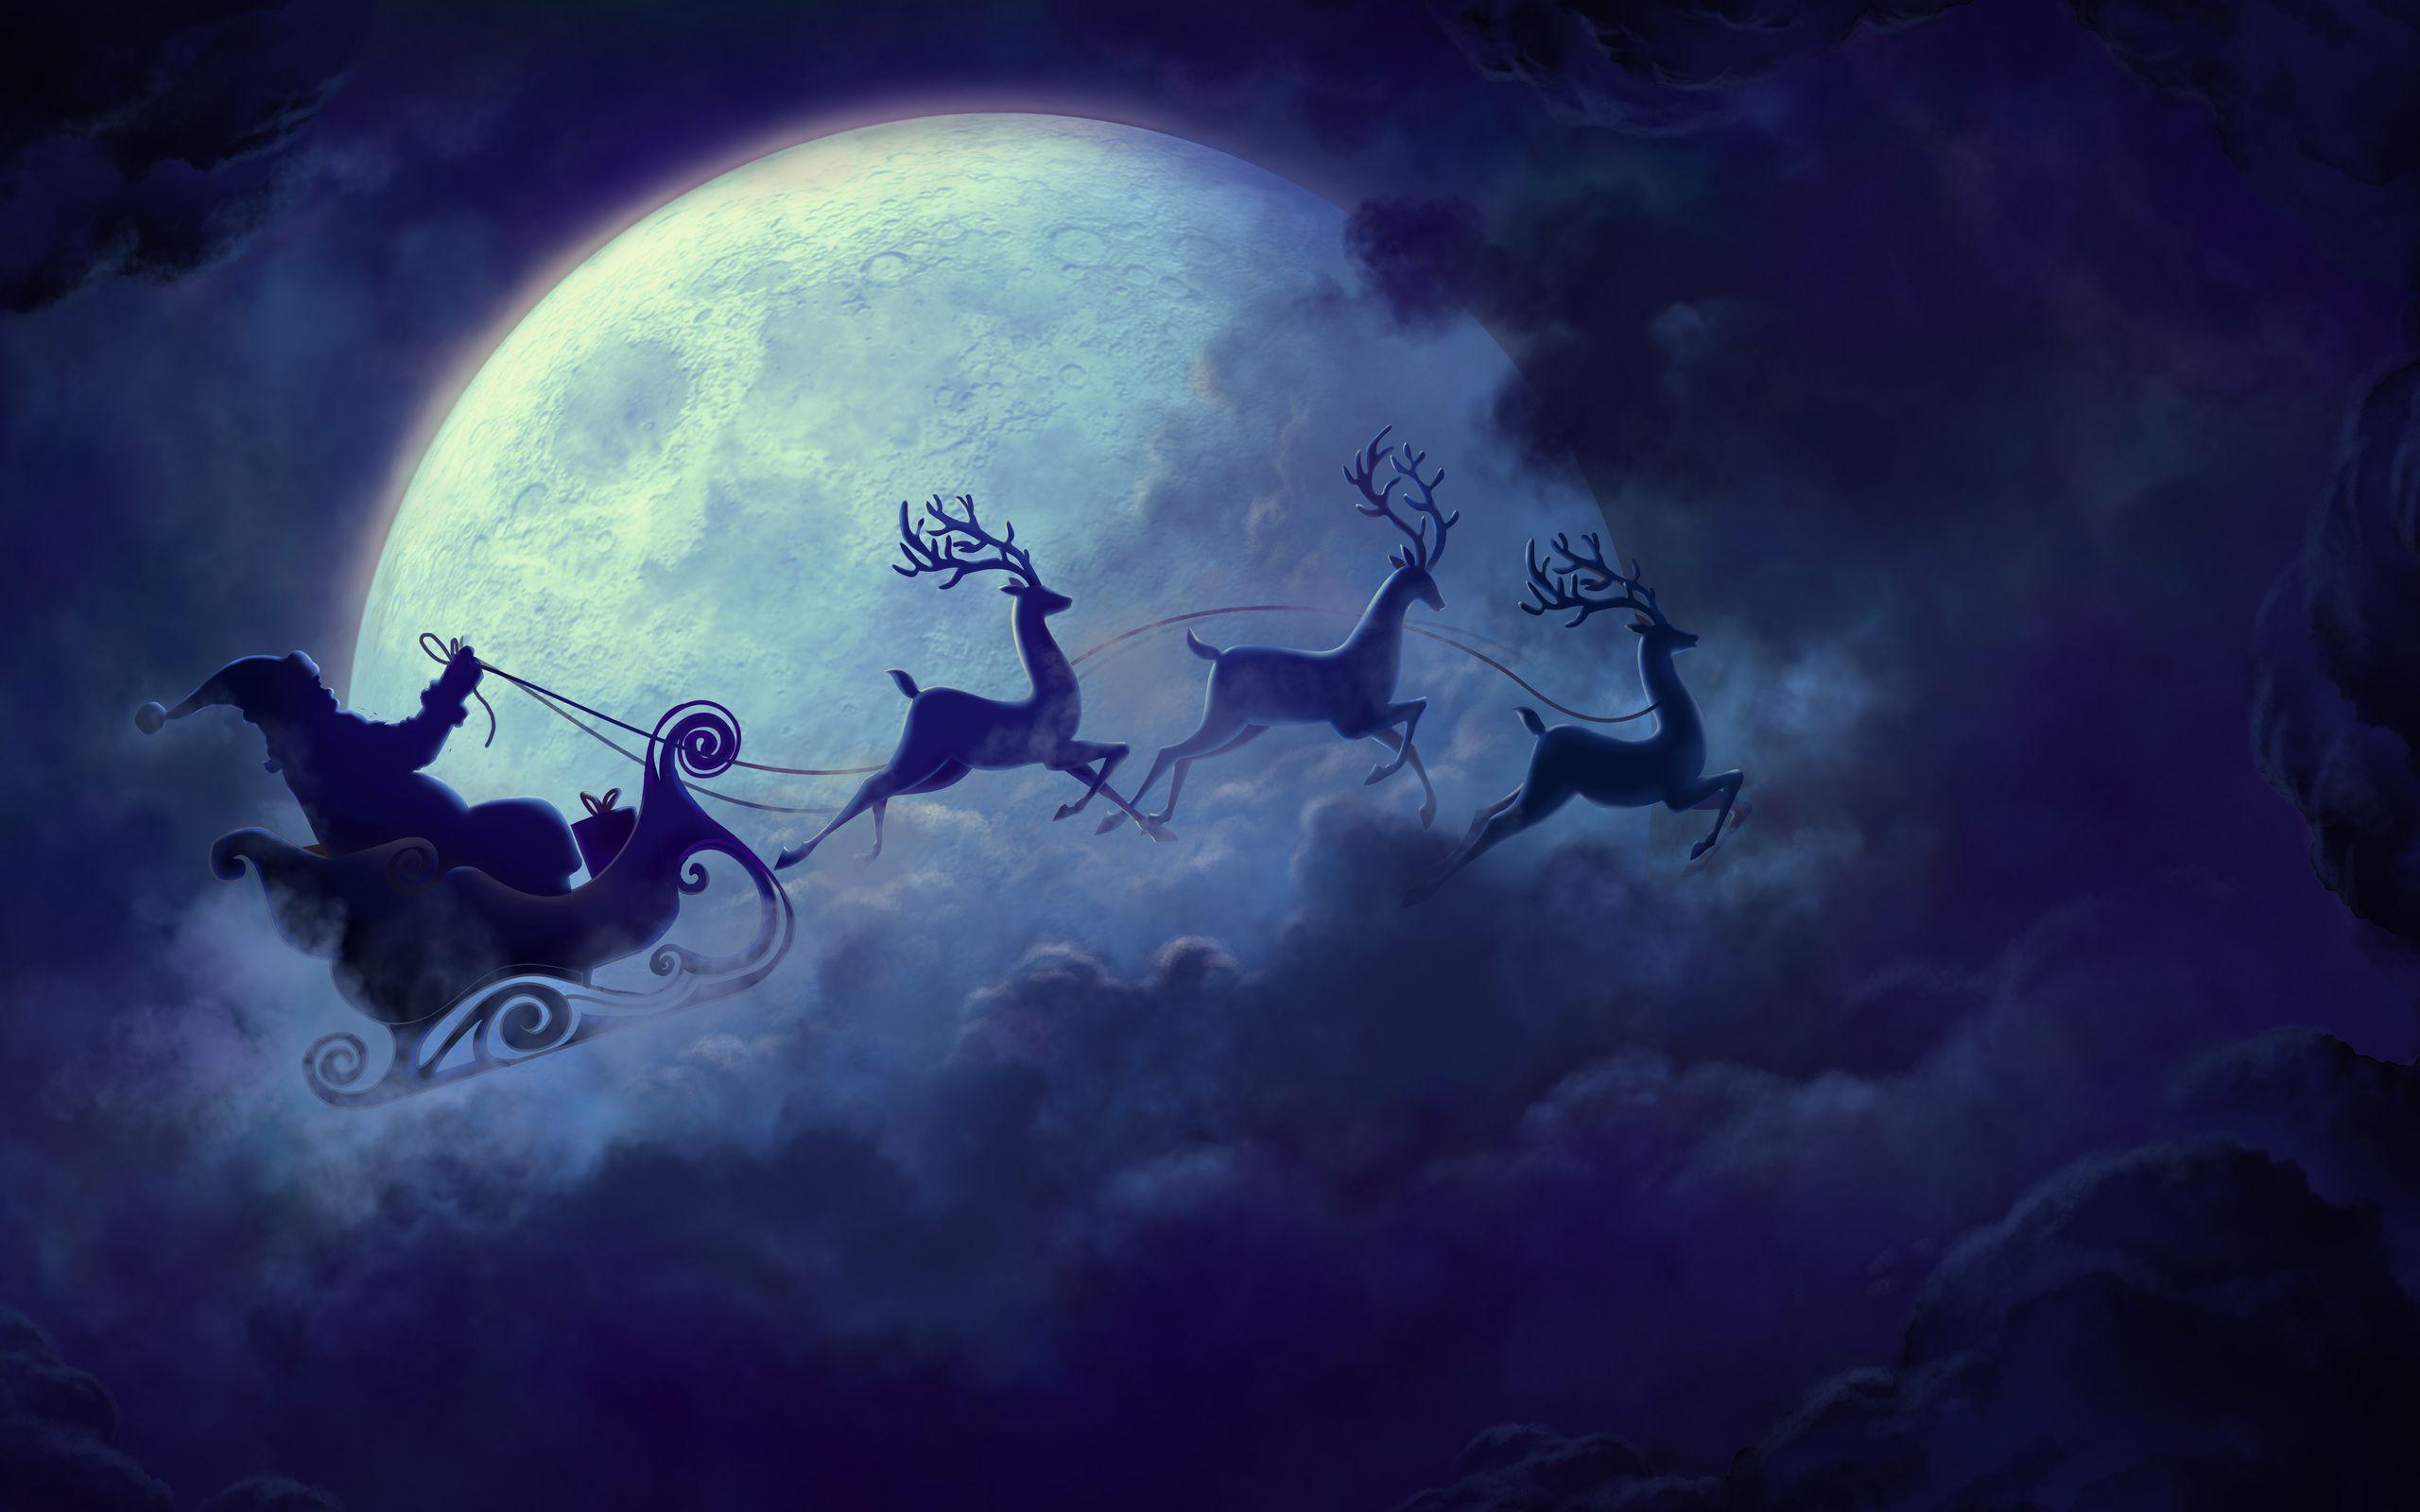 Sleigh HD Wallpaper and Background Image